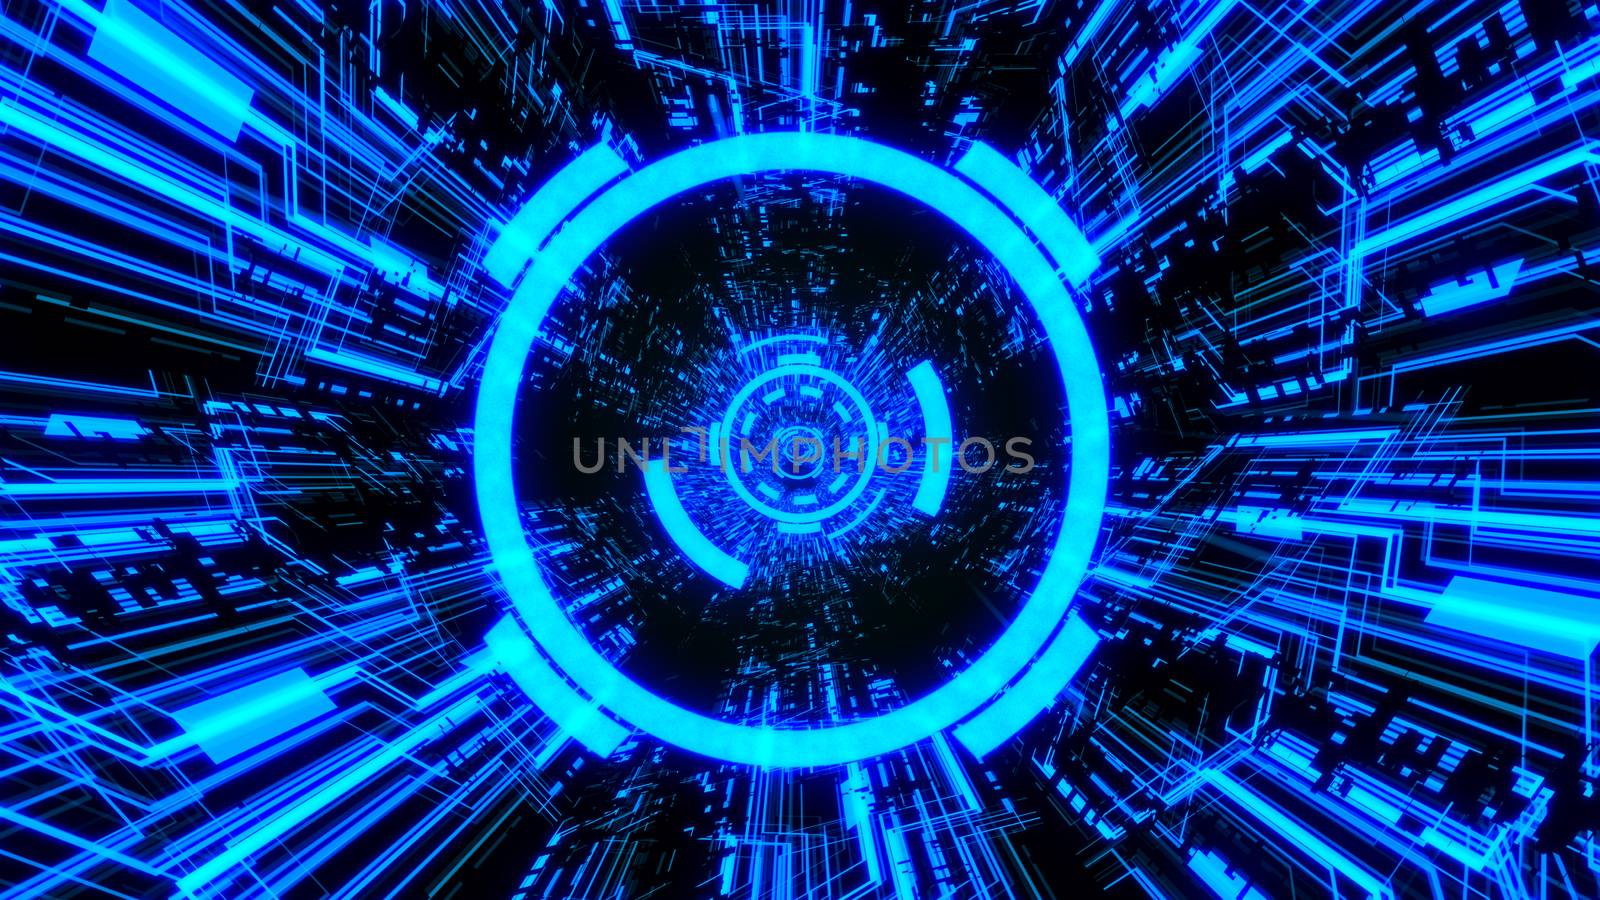 3D Digital Circuit System Tunnels and Waves with Digital Circles in the middle in Blue color theme Background Ver.3 by ariya23156